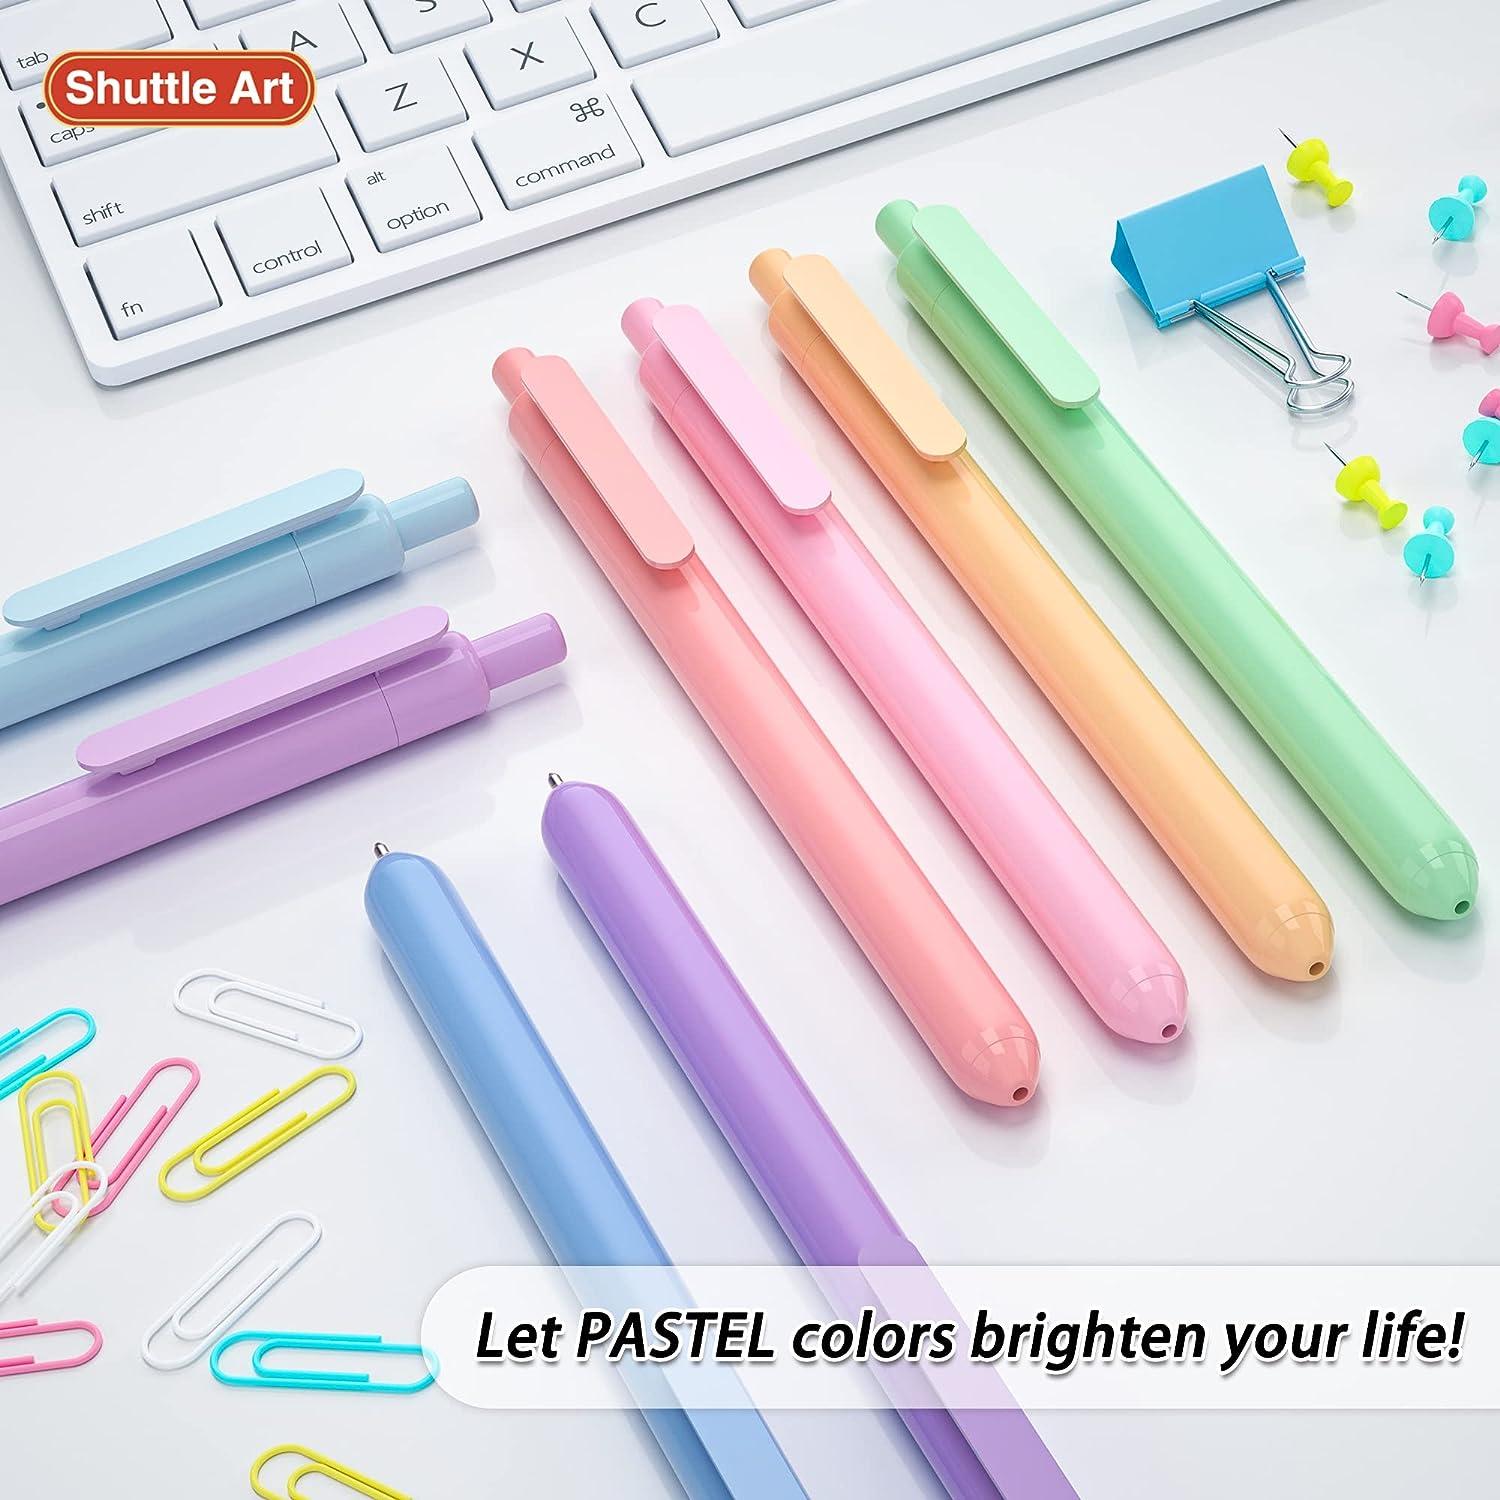 Shuttle Art Colored Retractable Gel Pens, 8 Pastel Ink Colors, Cute Pens  0.5mm Fine Point Quick Drying for Writing Drawing Journaling Note Taking